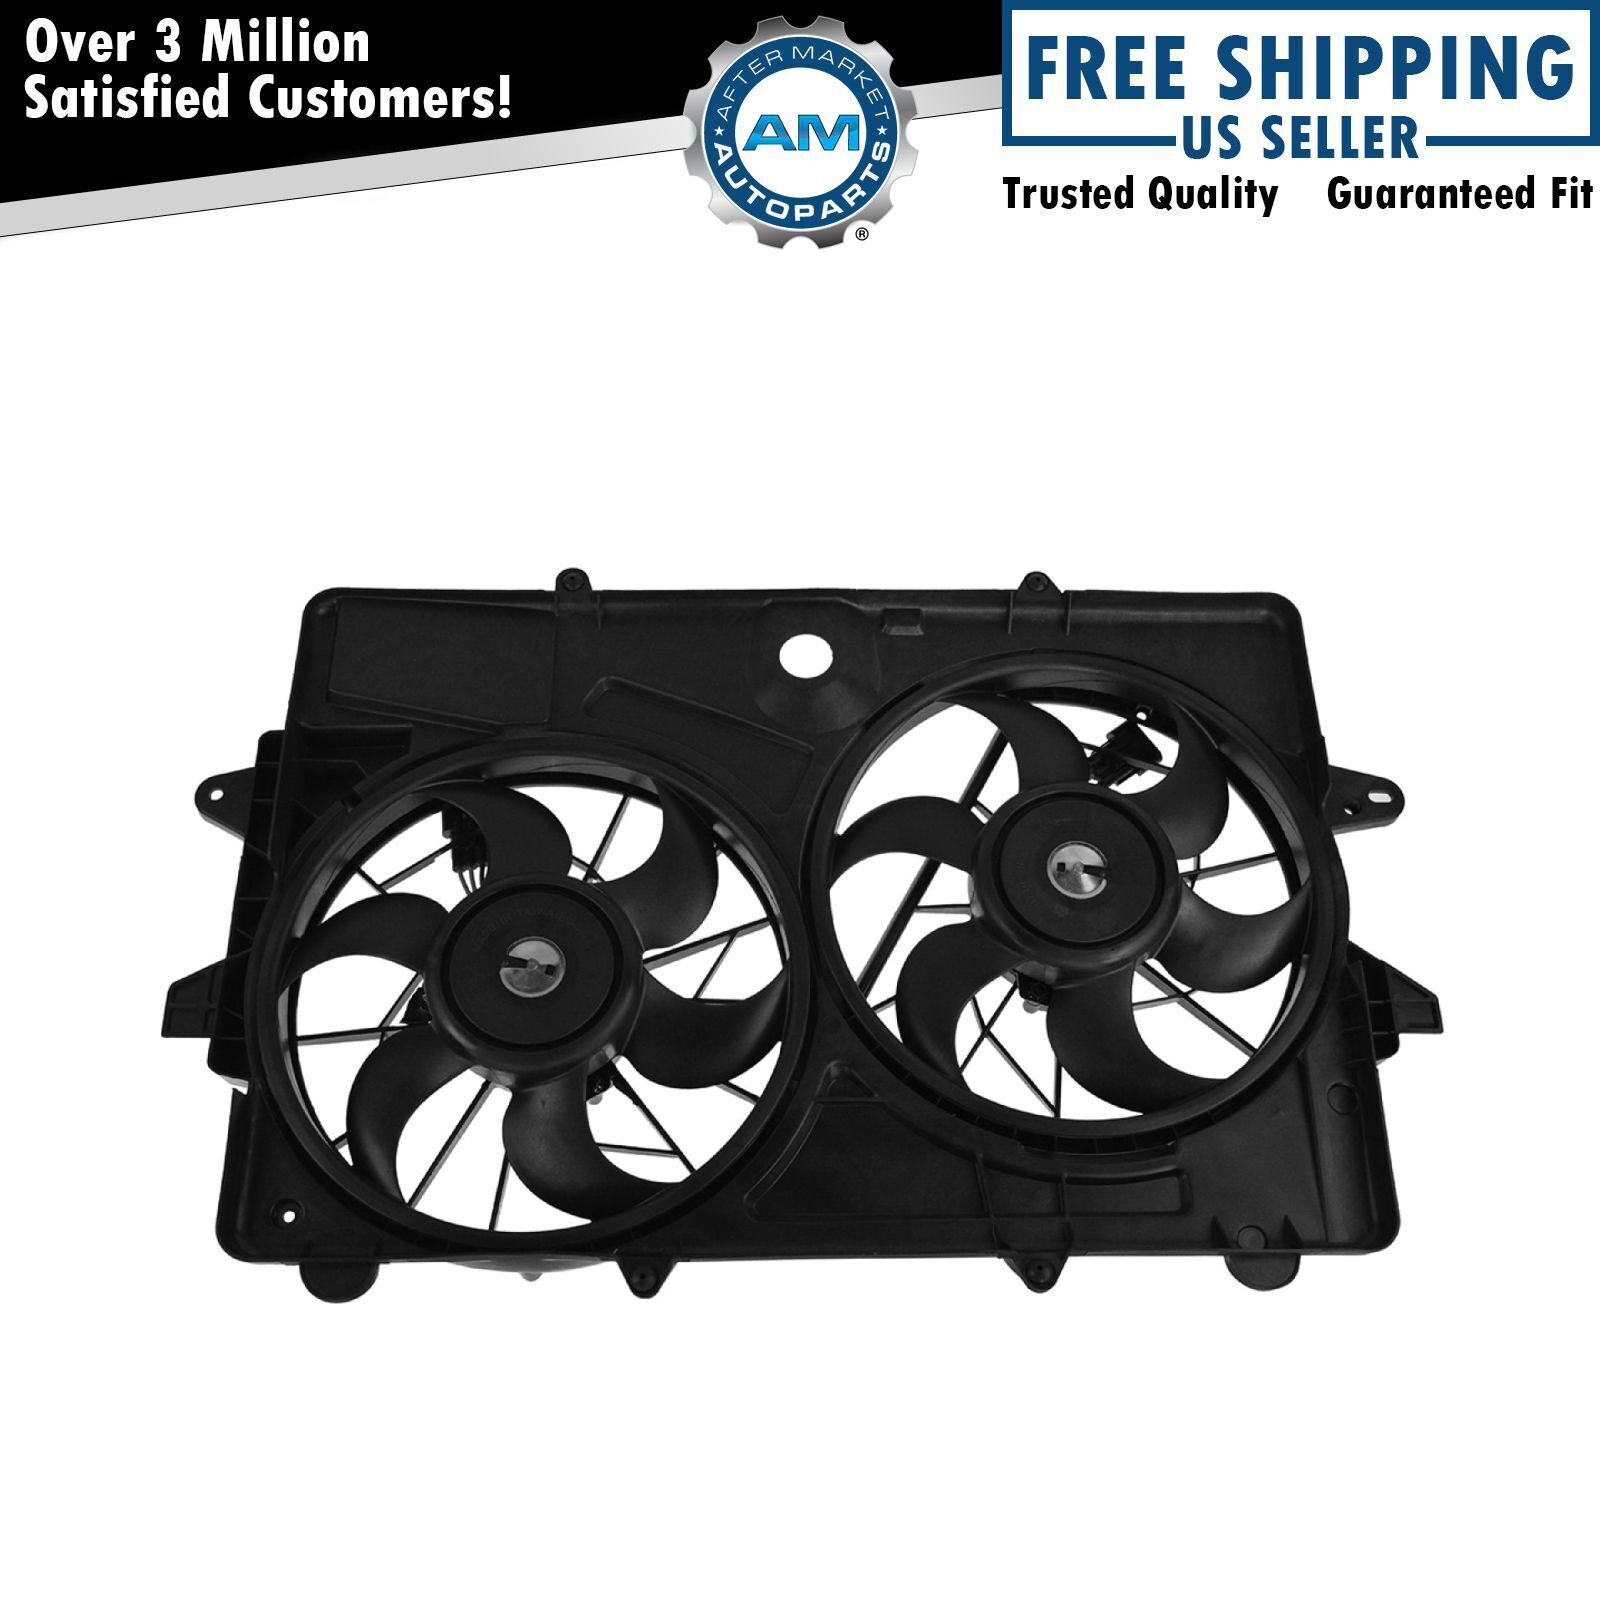 Radiator A/C Cooling Fan 4 Cyl for Tribute Mariner Escape